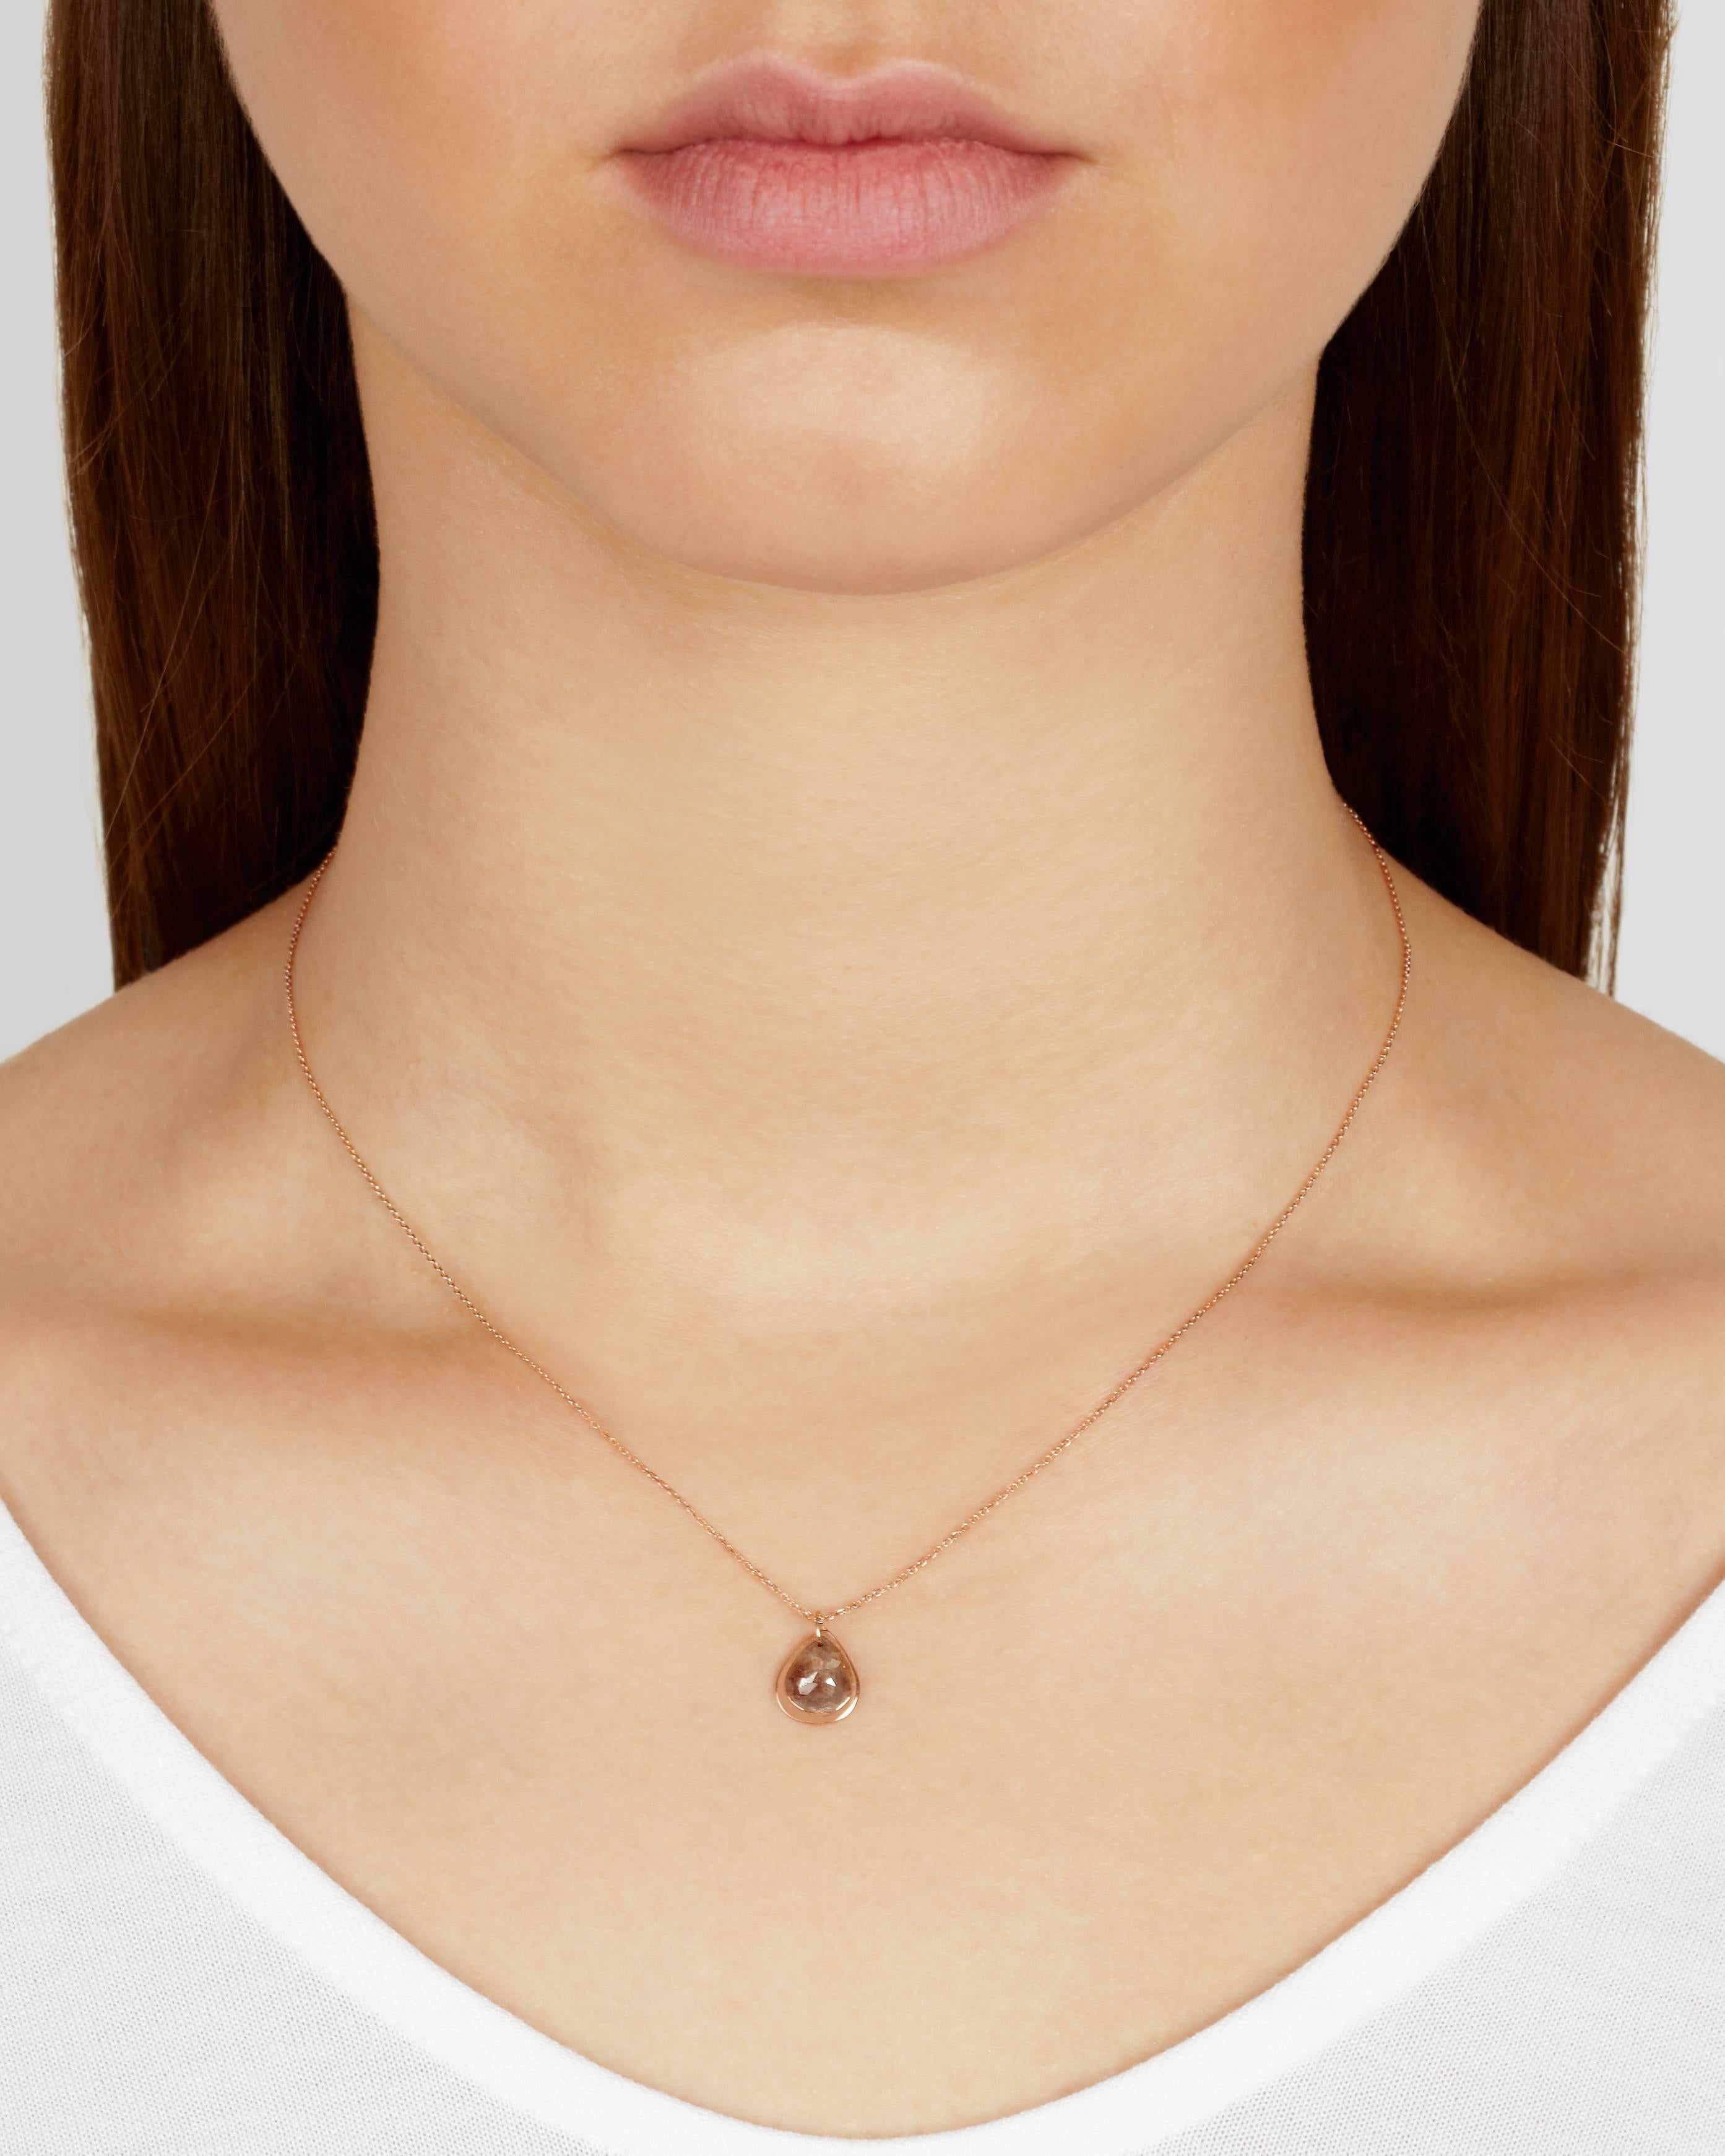 Lightweight and easy to wear, this necklace features a solid 9-carat rose gold teardrop accentuated with a rough rosecut diamond of over a carat in weight. The two elements hang independently from a delicate 16inch 9-carat rose gold chain which